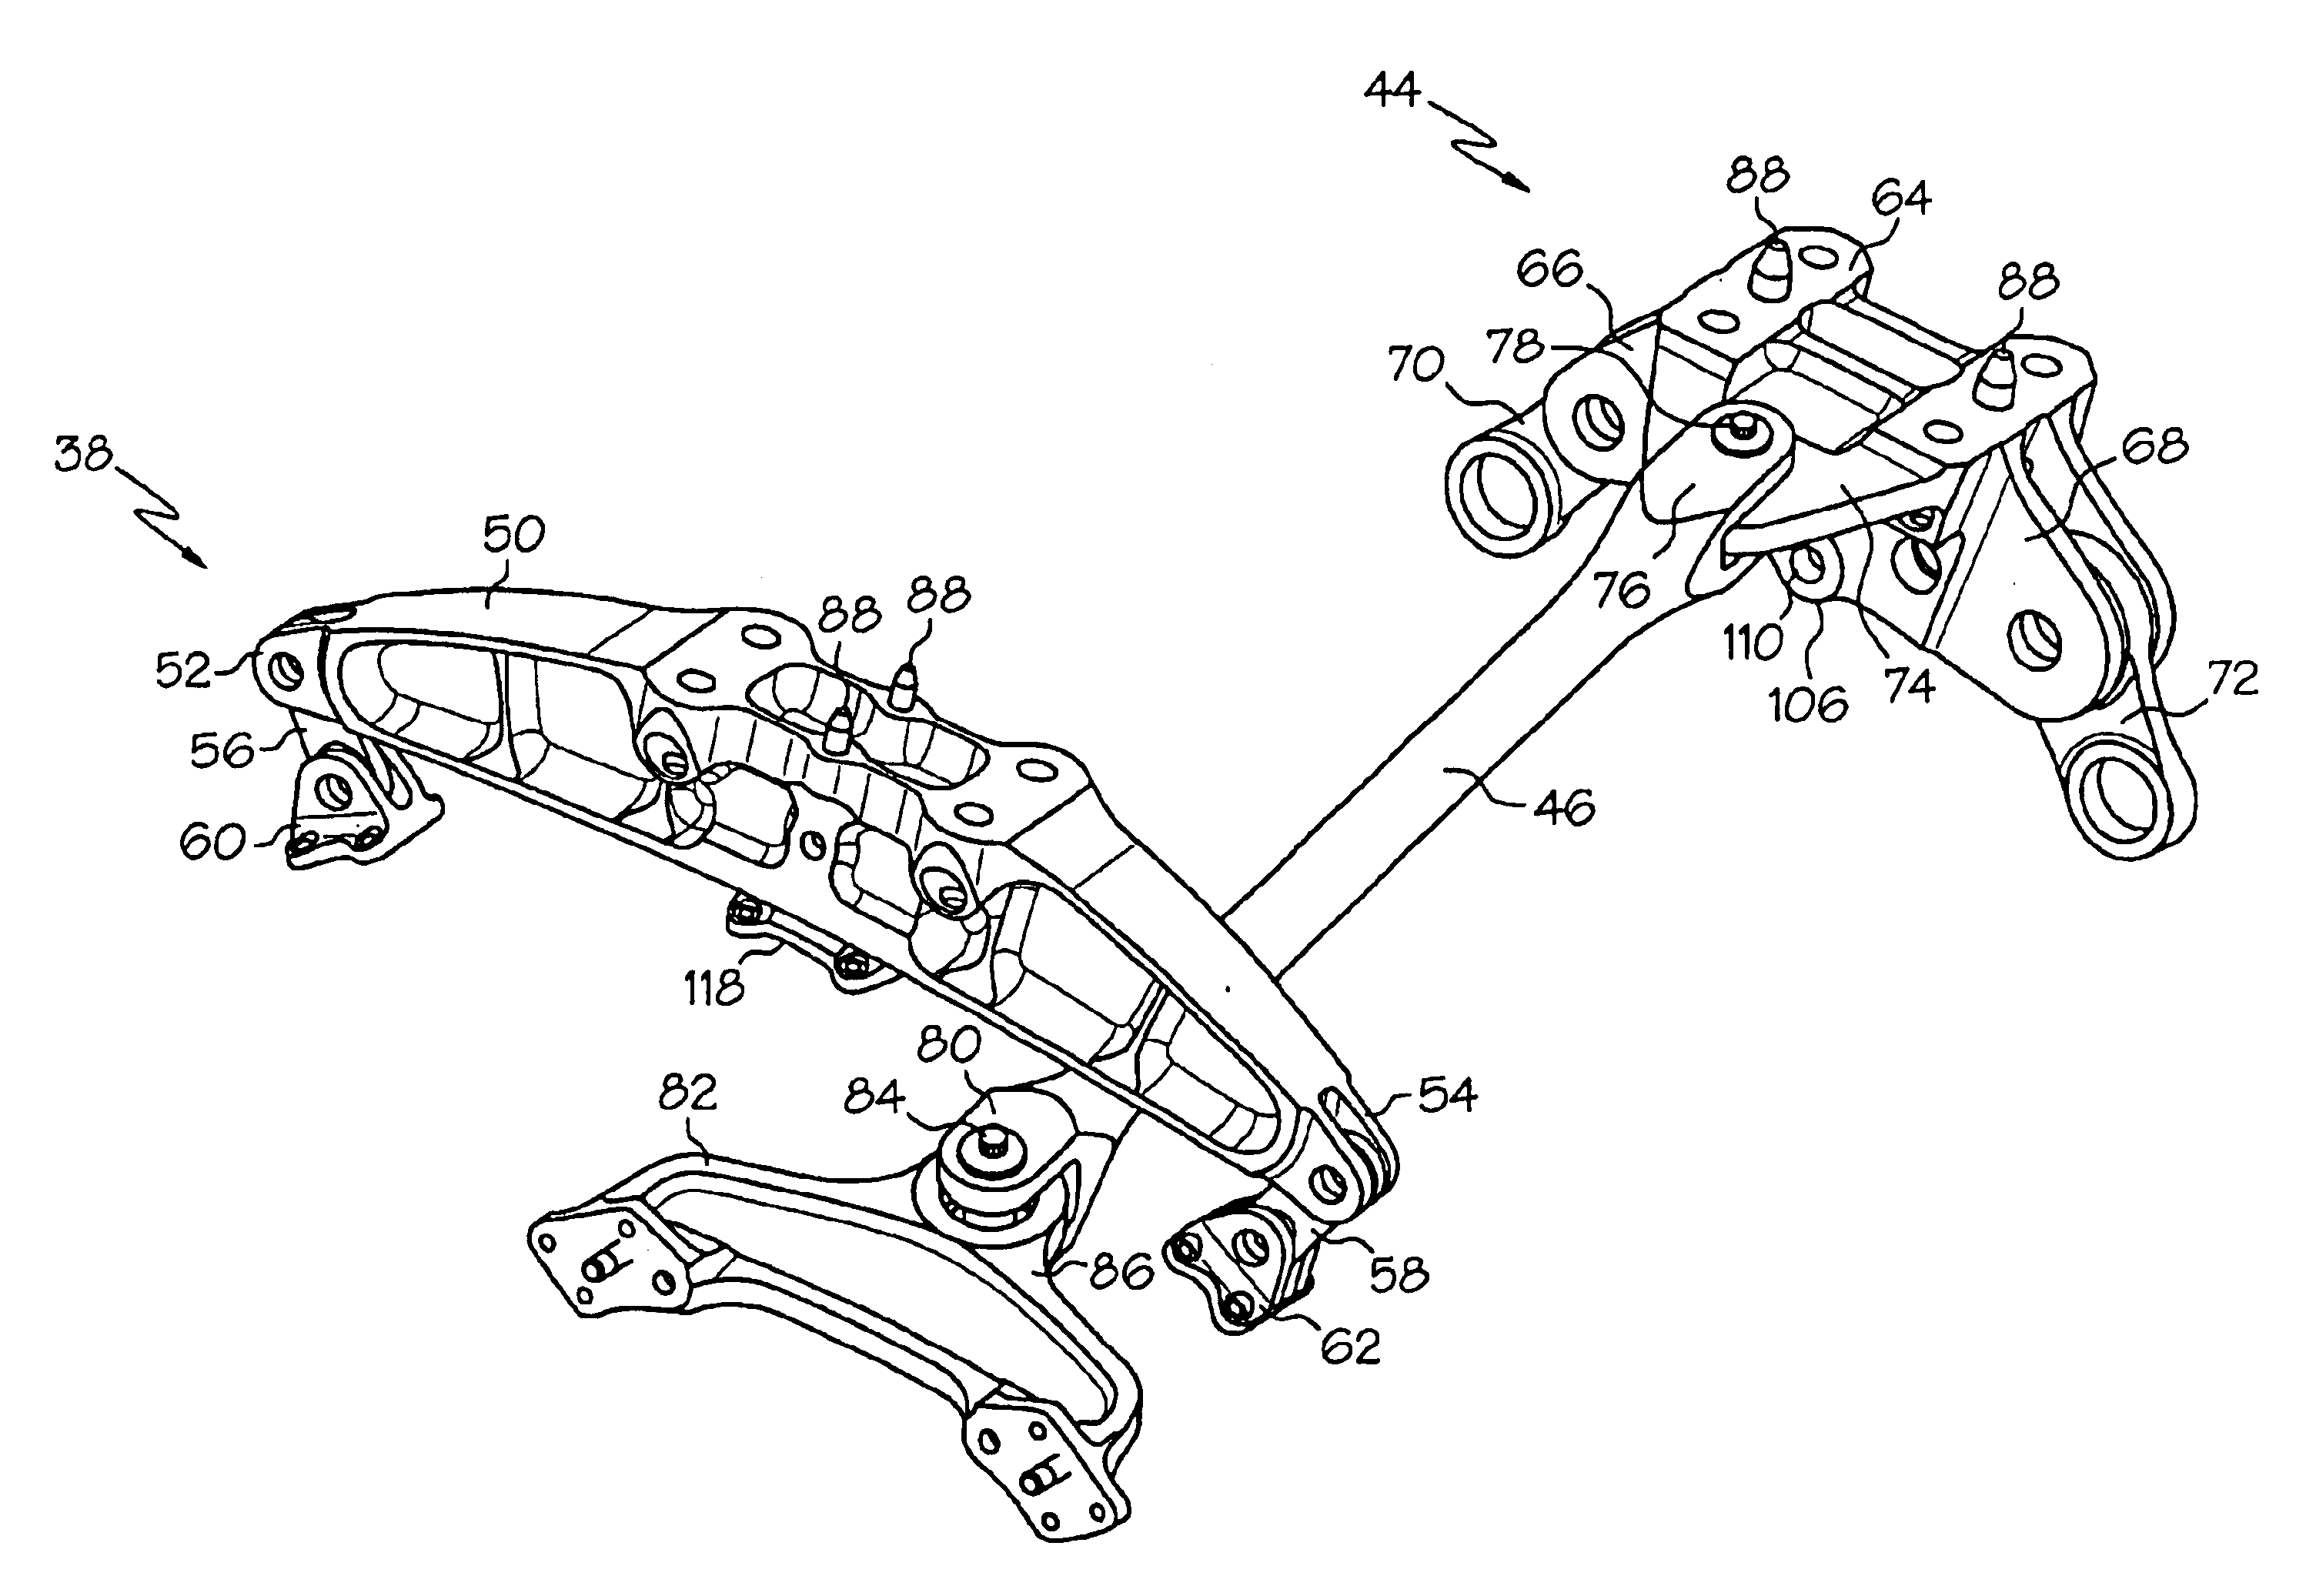 Fail-safe aircraft engine mounting system